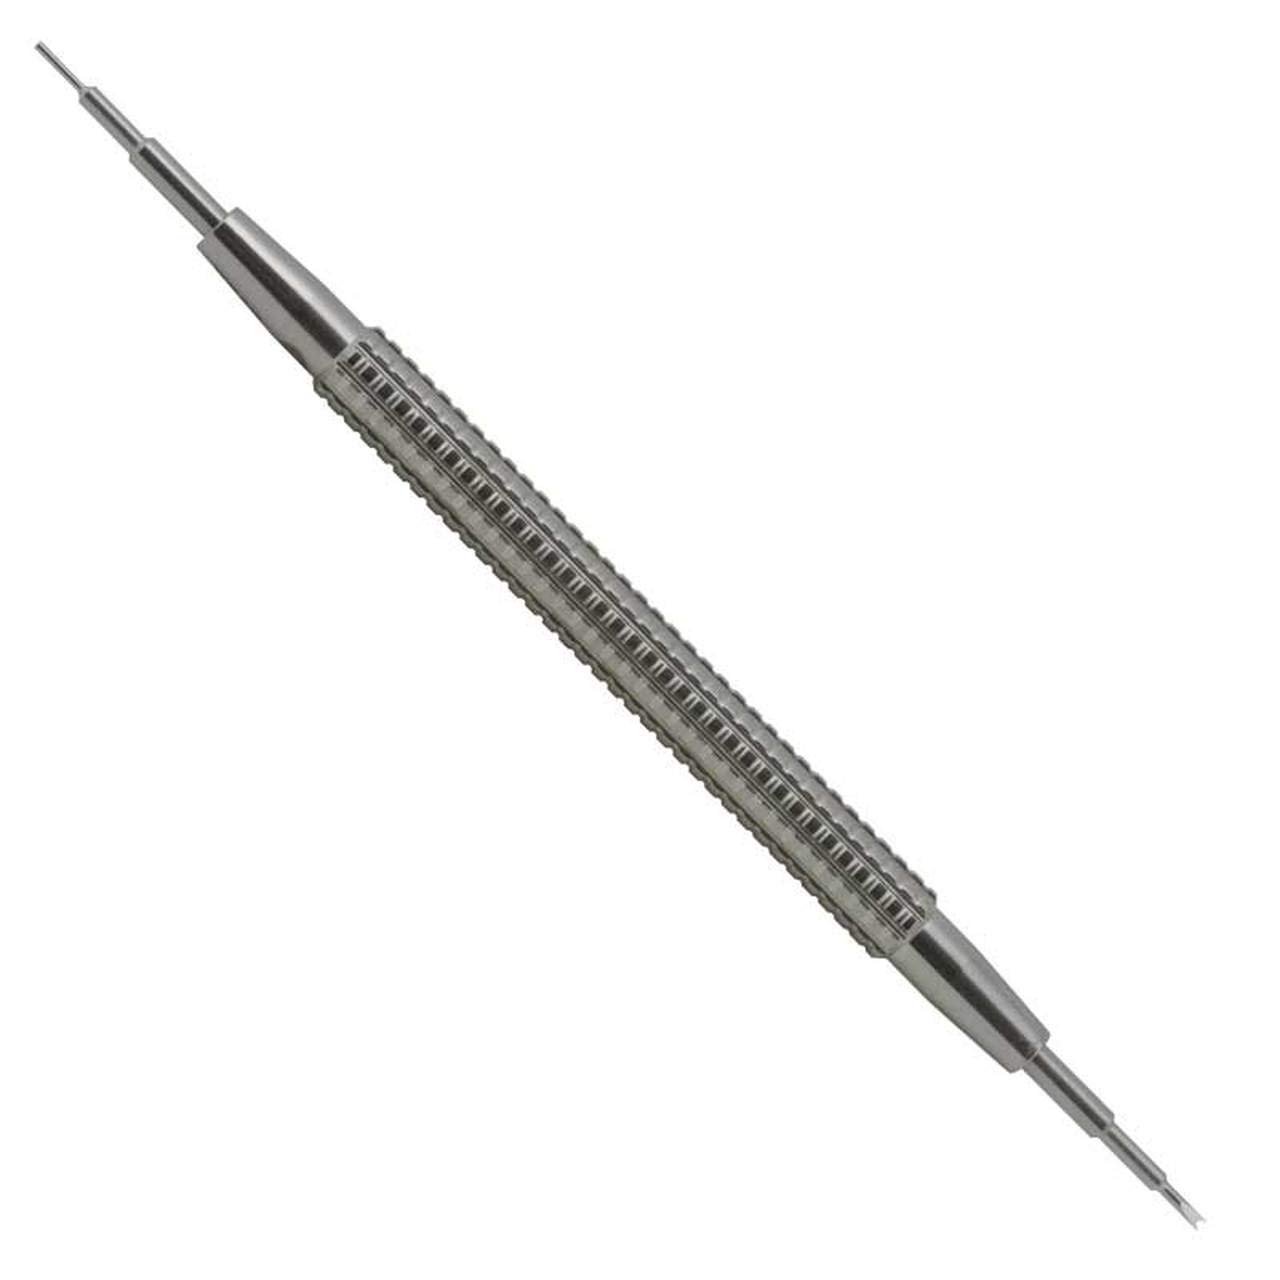 Bergeon 7767-F Watch Spring Bar Tool - Long Stainless Steel Handle with Replaceable Screw In Fine Tool End